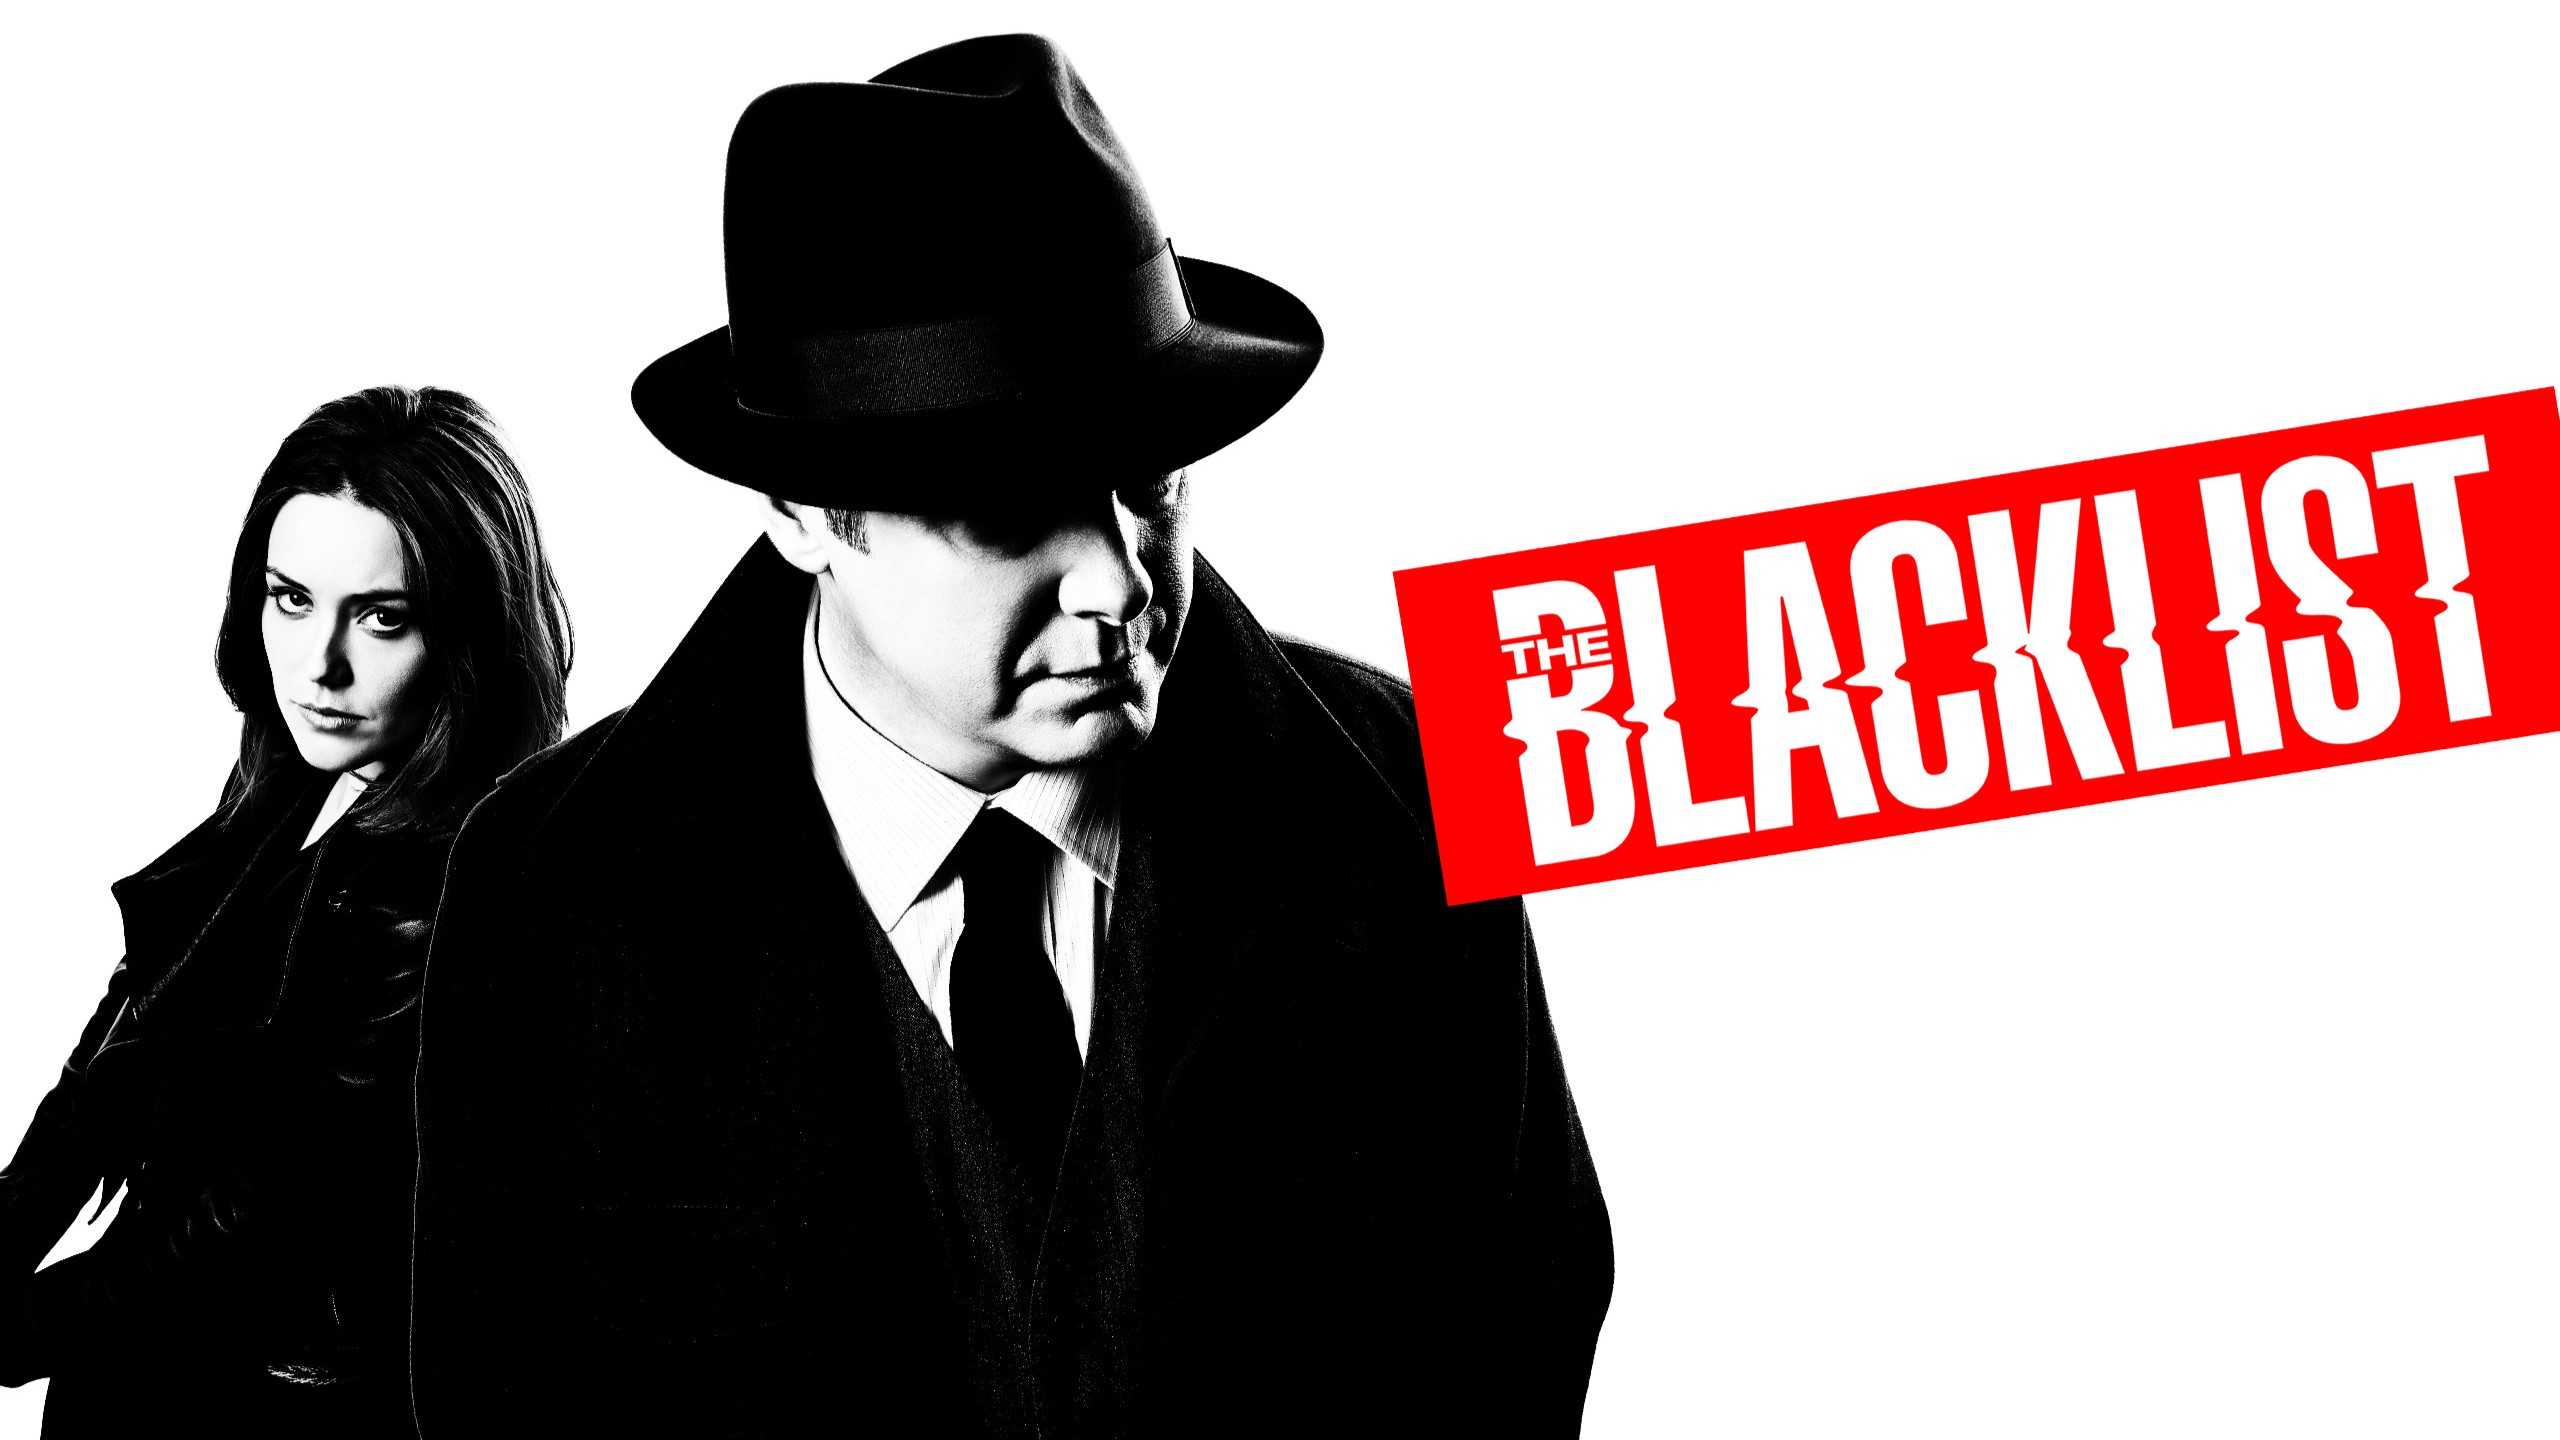 The Blacklist Season 4 Where To Watch And Stream Online